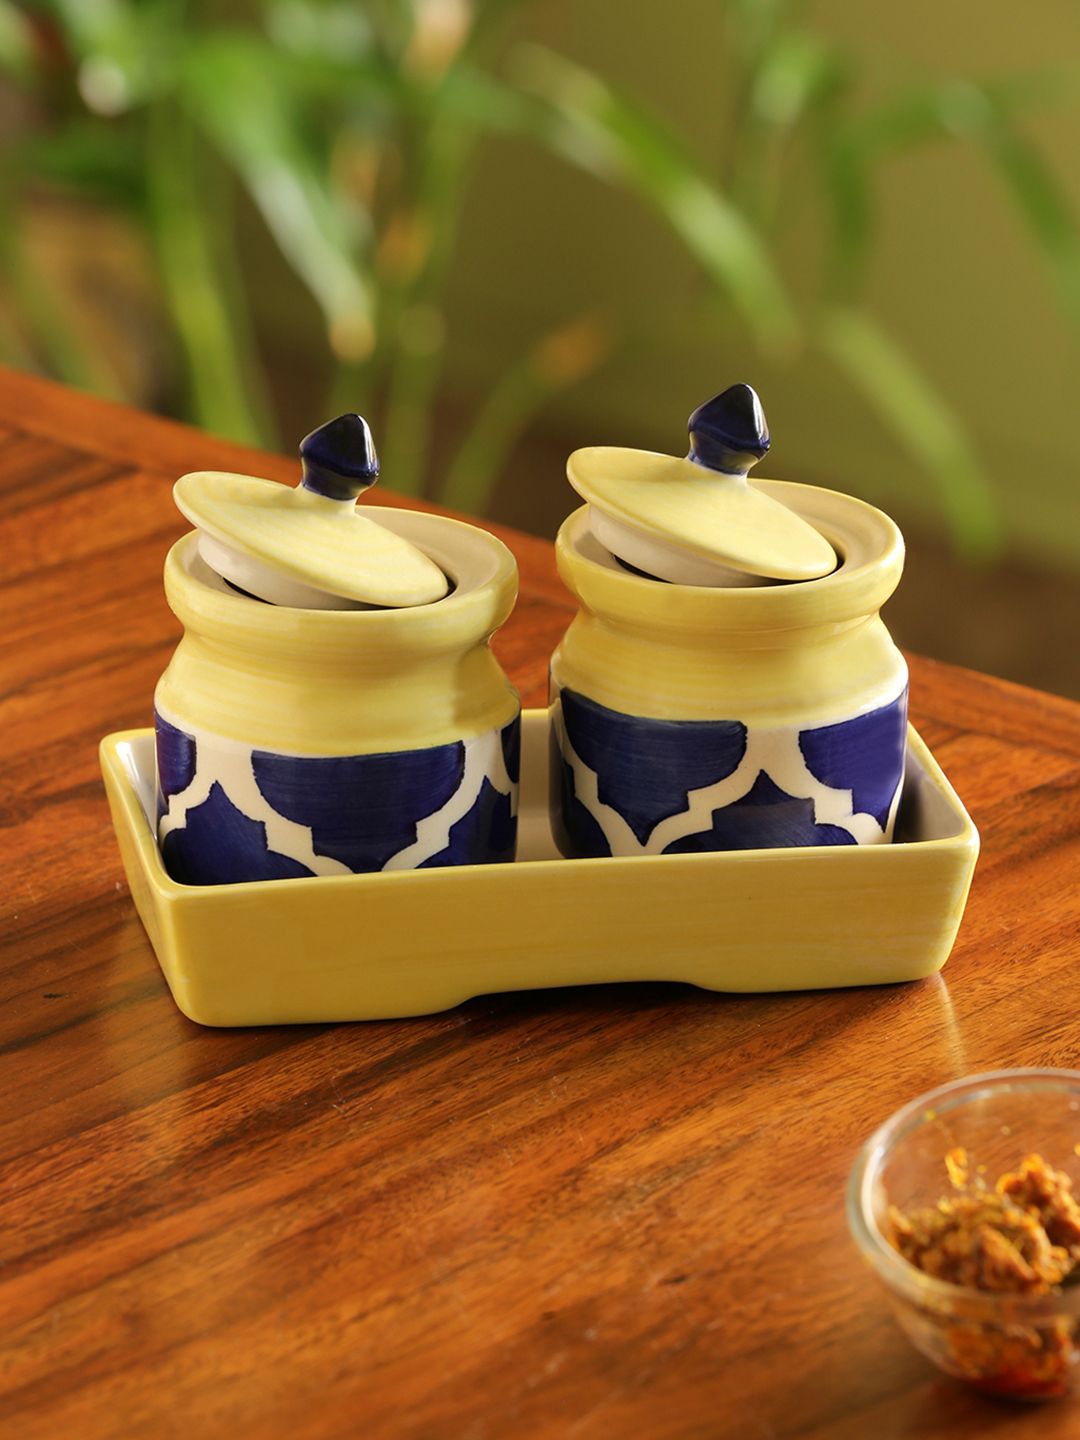 ExclusiveLane 'Pickled-Coupled' Handpainted Ceramic Pickle & Chutney Jars (Set Of 2) Price in India